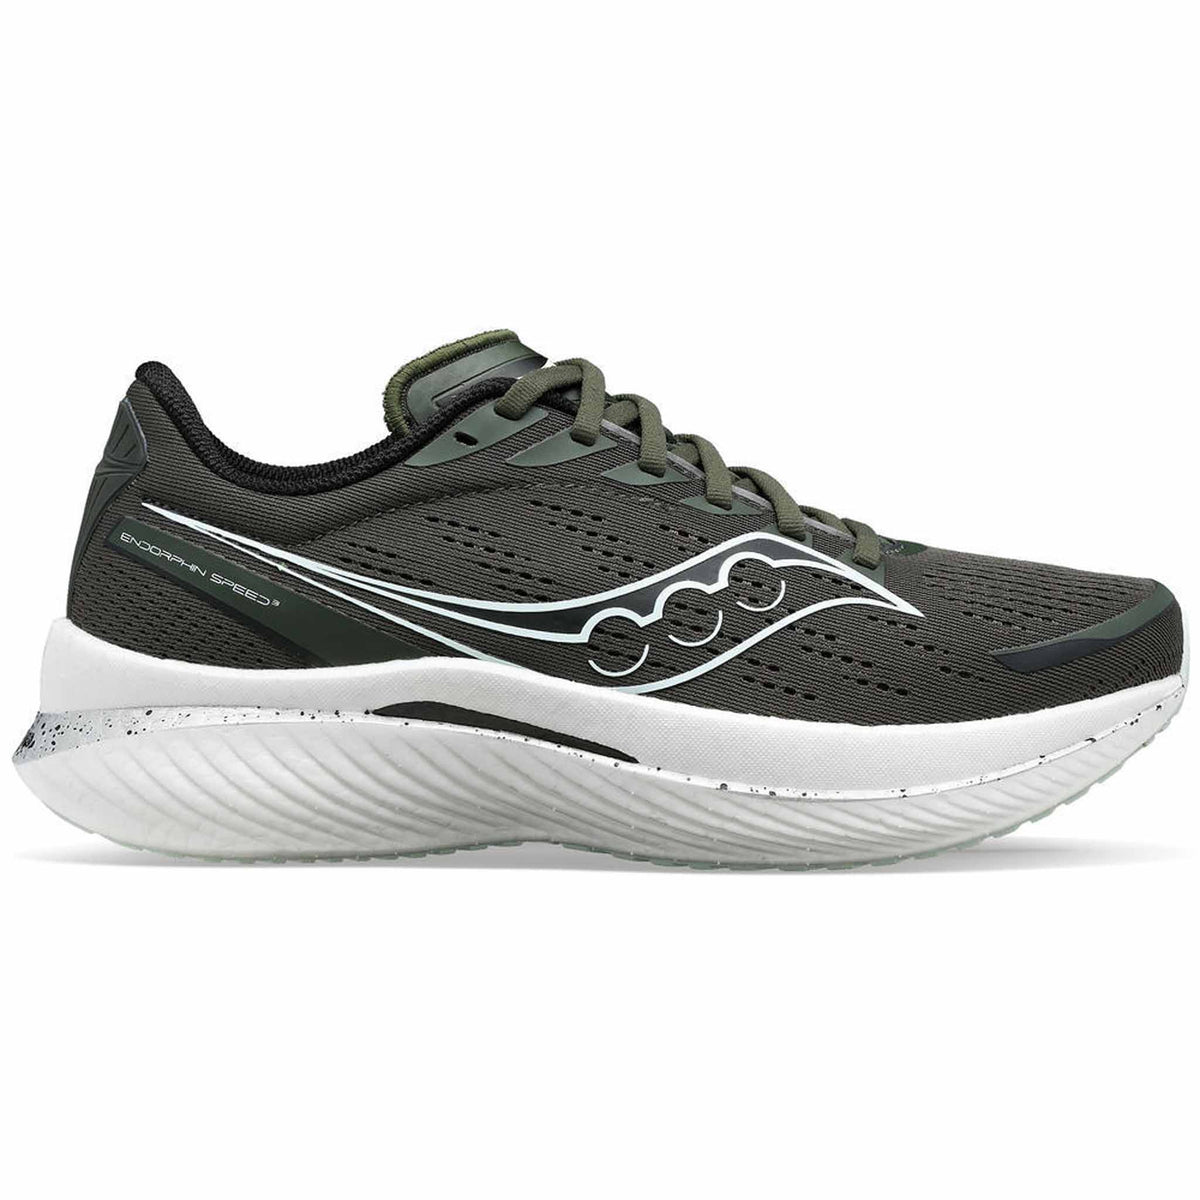 Saucony Endorphin Speed 3 chaussures de course homme - Umbra / Silver